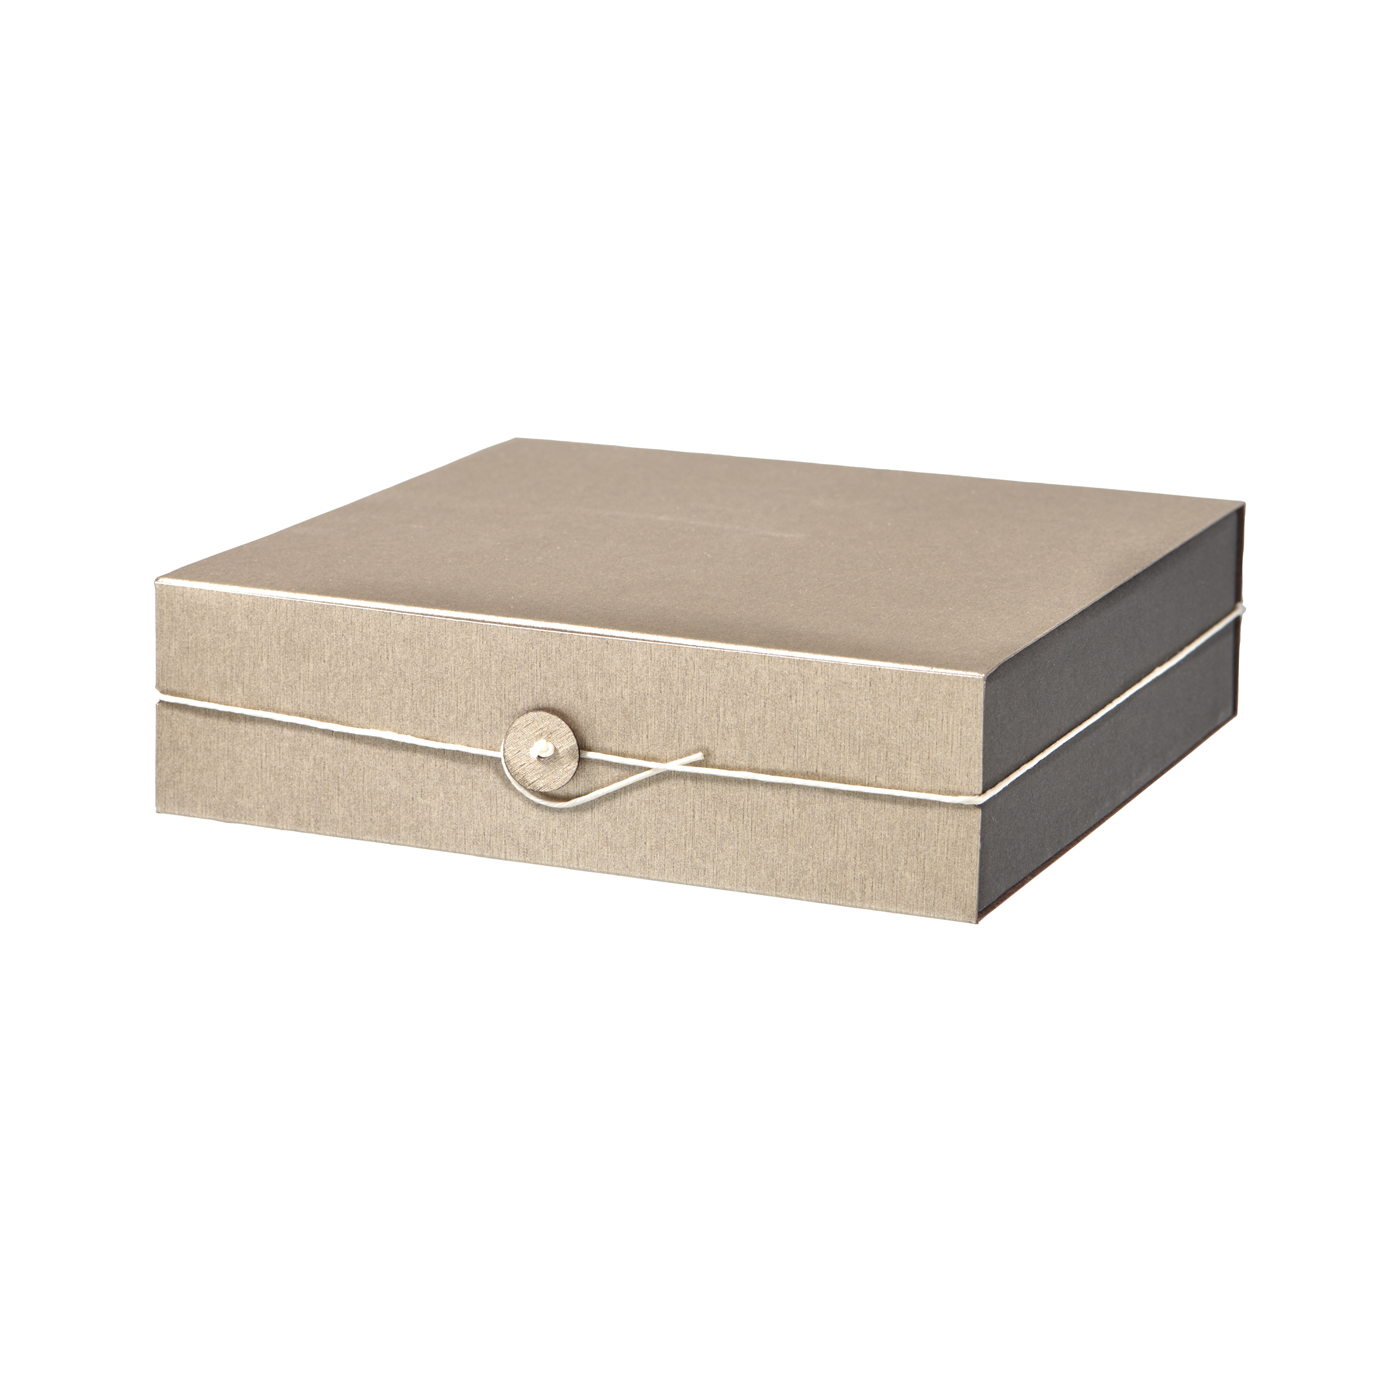 Jewellery Packaging "Pure", gold, 120 x 120 x 33 mm - 1 piece